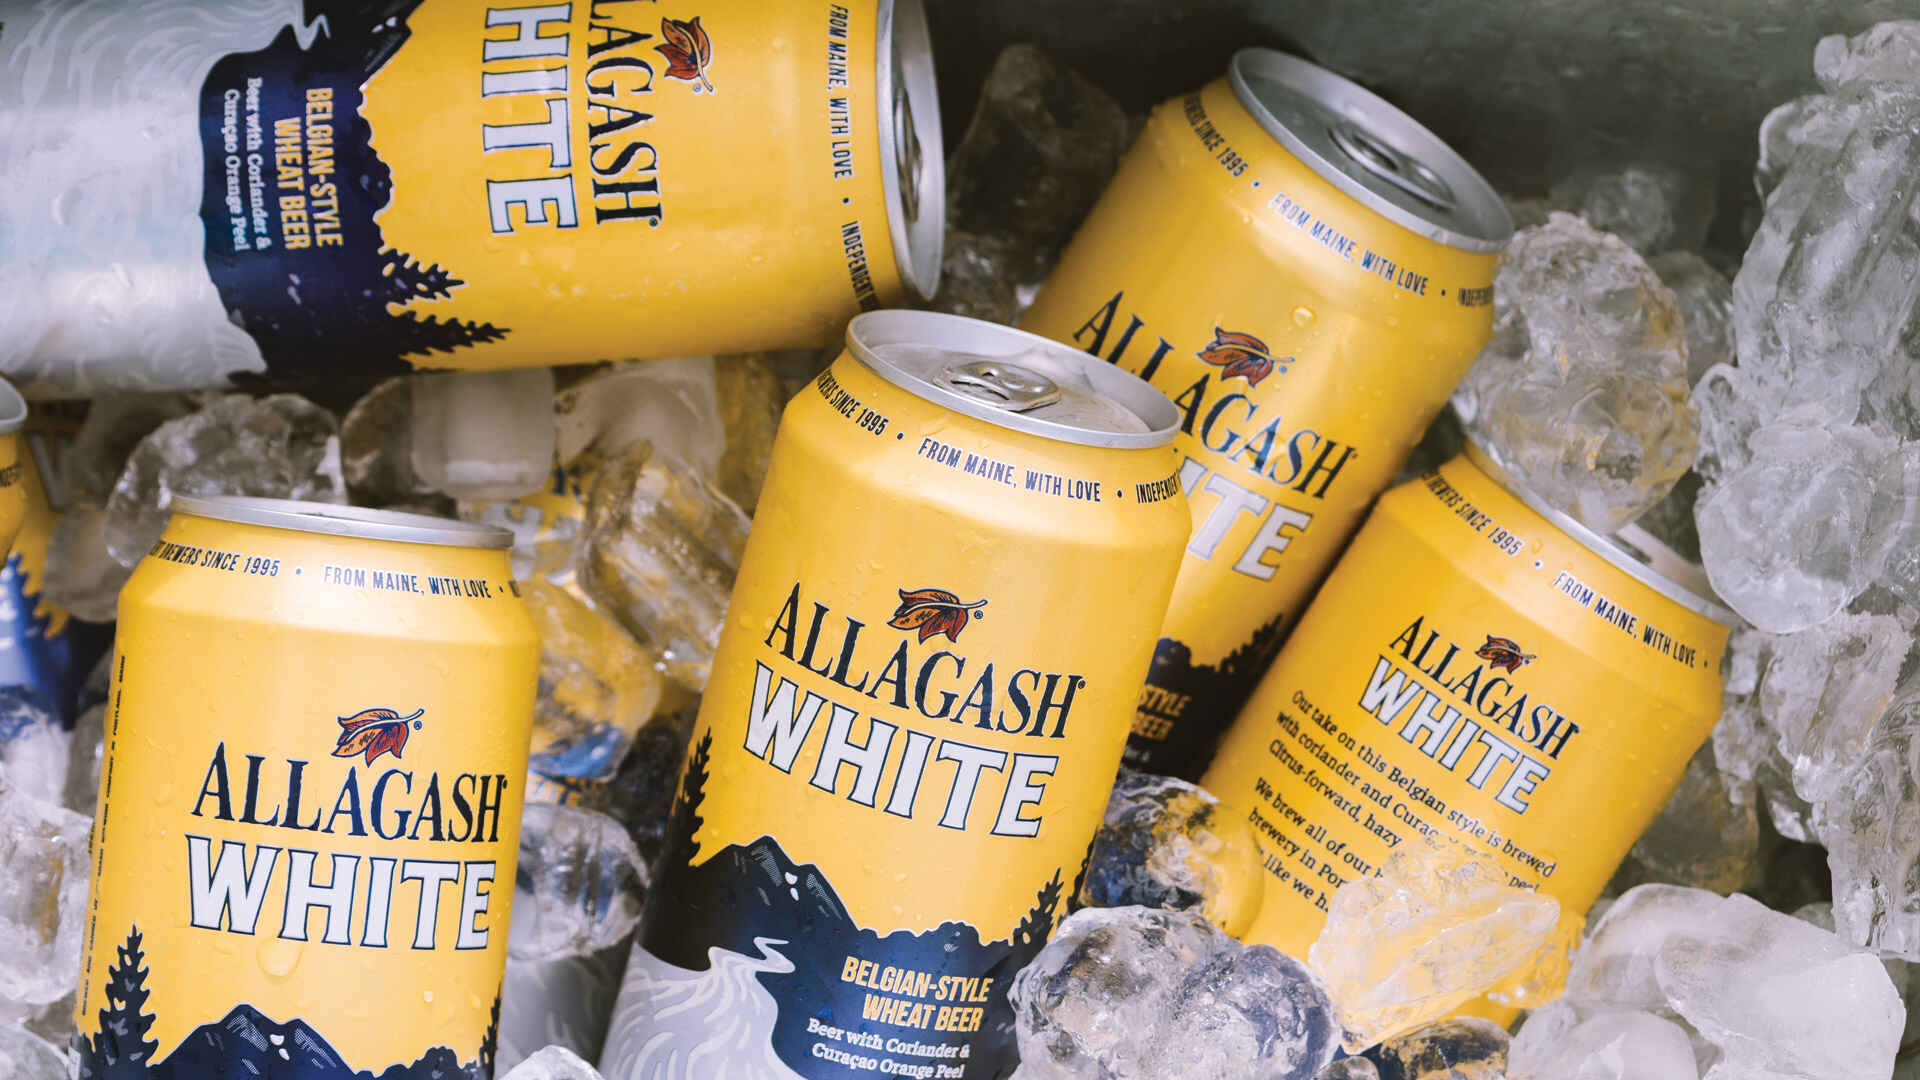 allagash white 16 oz. cans in a cooler with ice